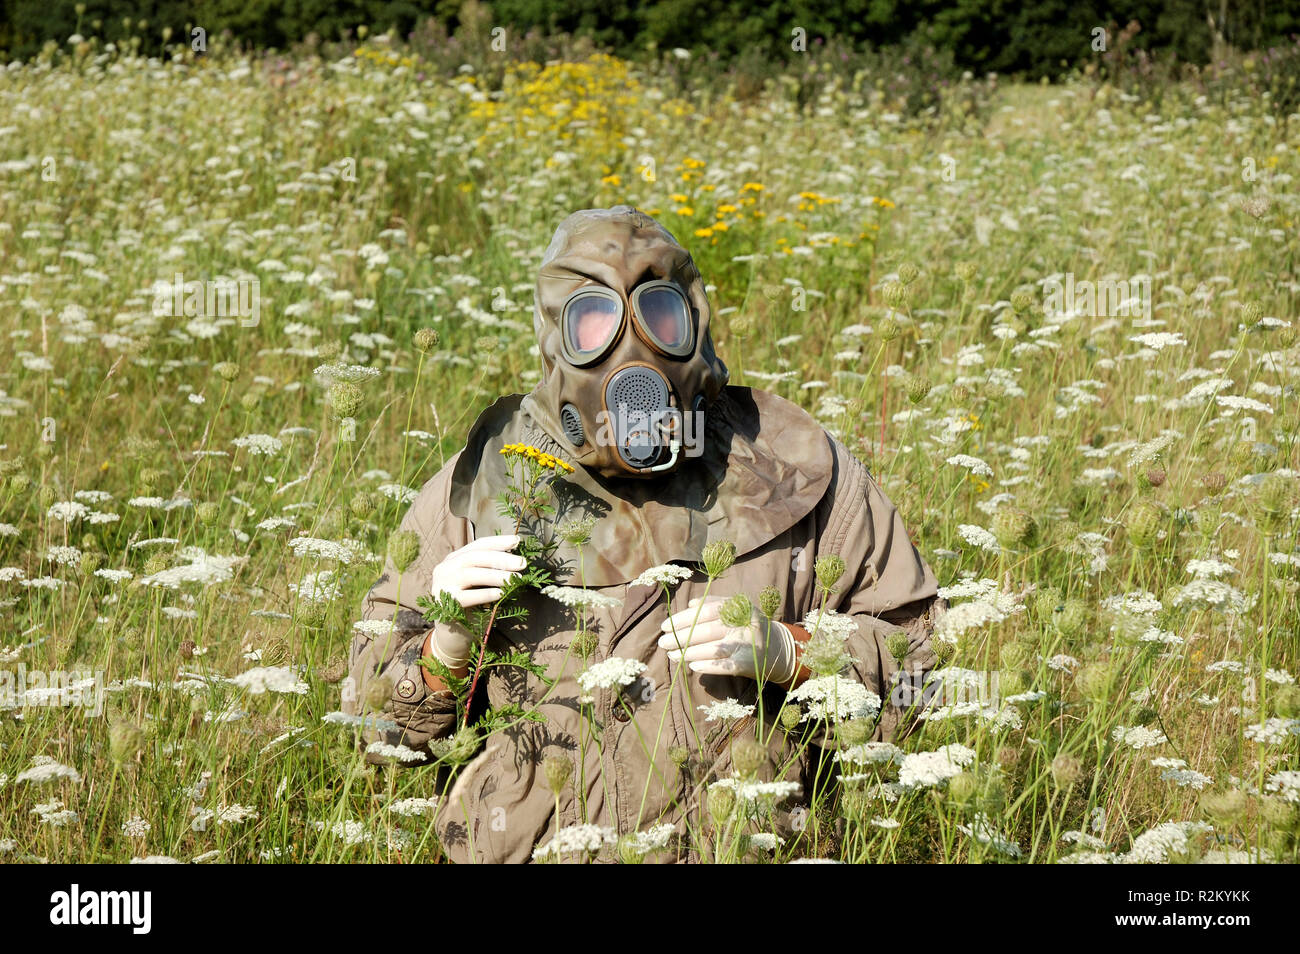 person with gas mask in contaminated field Stock Photo